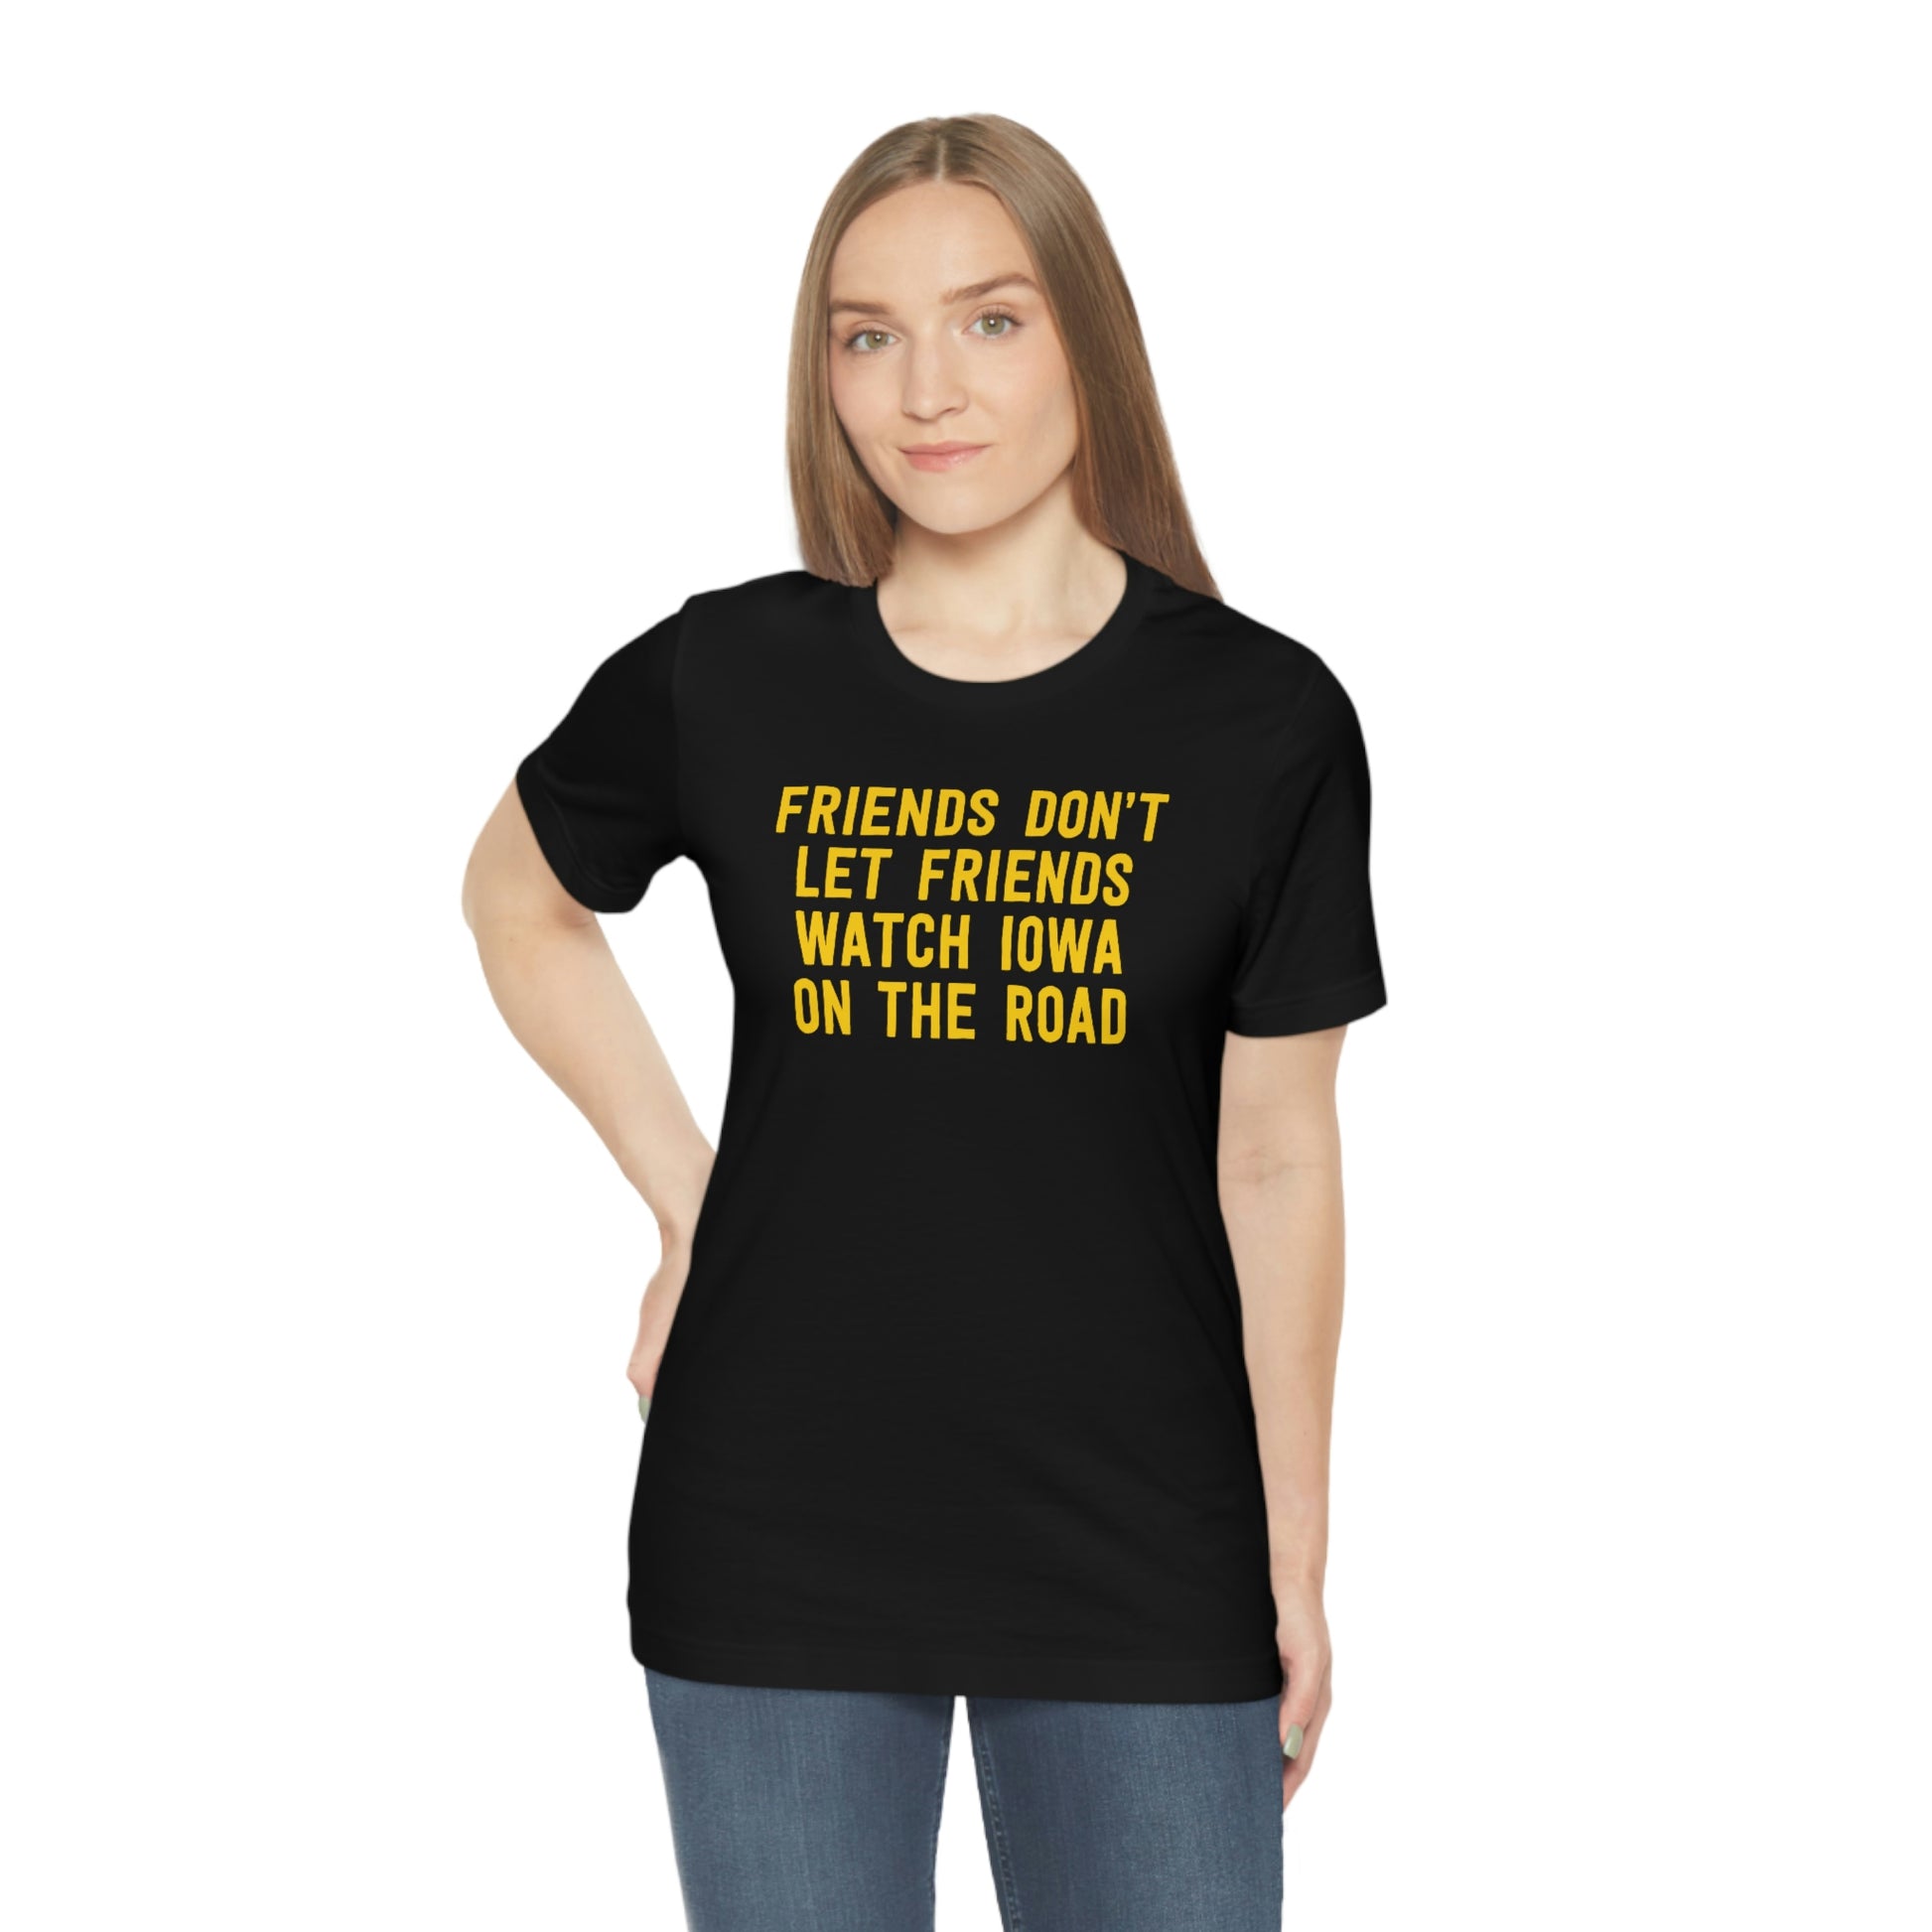 Friends Don't Let Friends Watch Iowa On The Road Shirt in Black and Gold - Female Posing